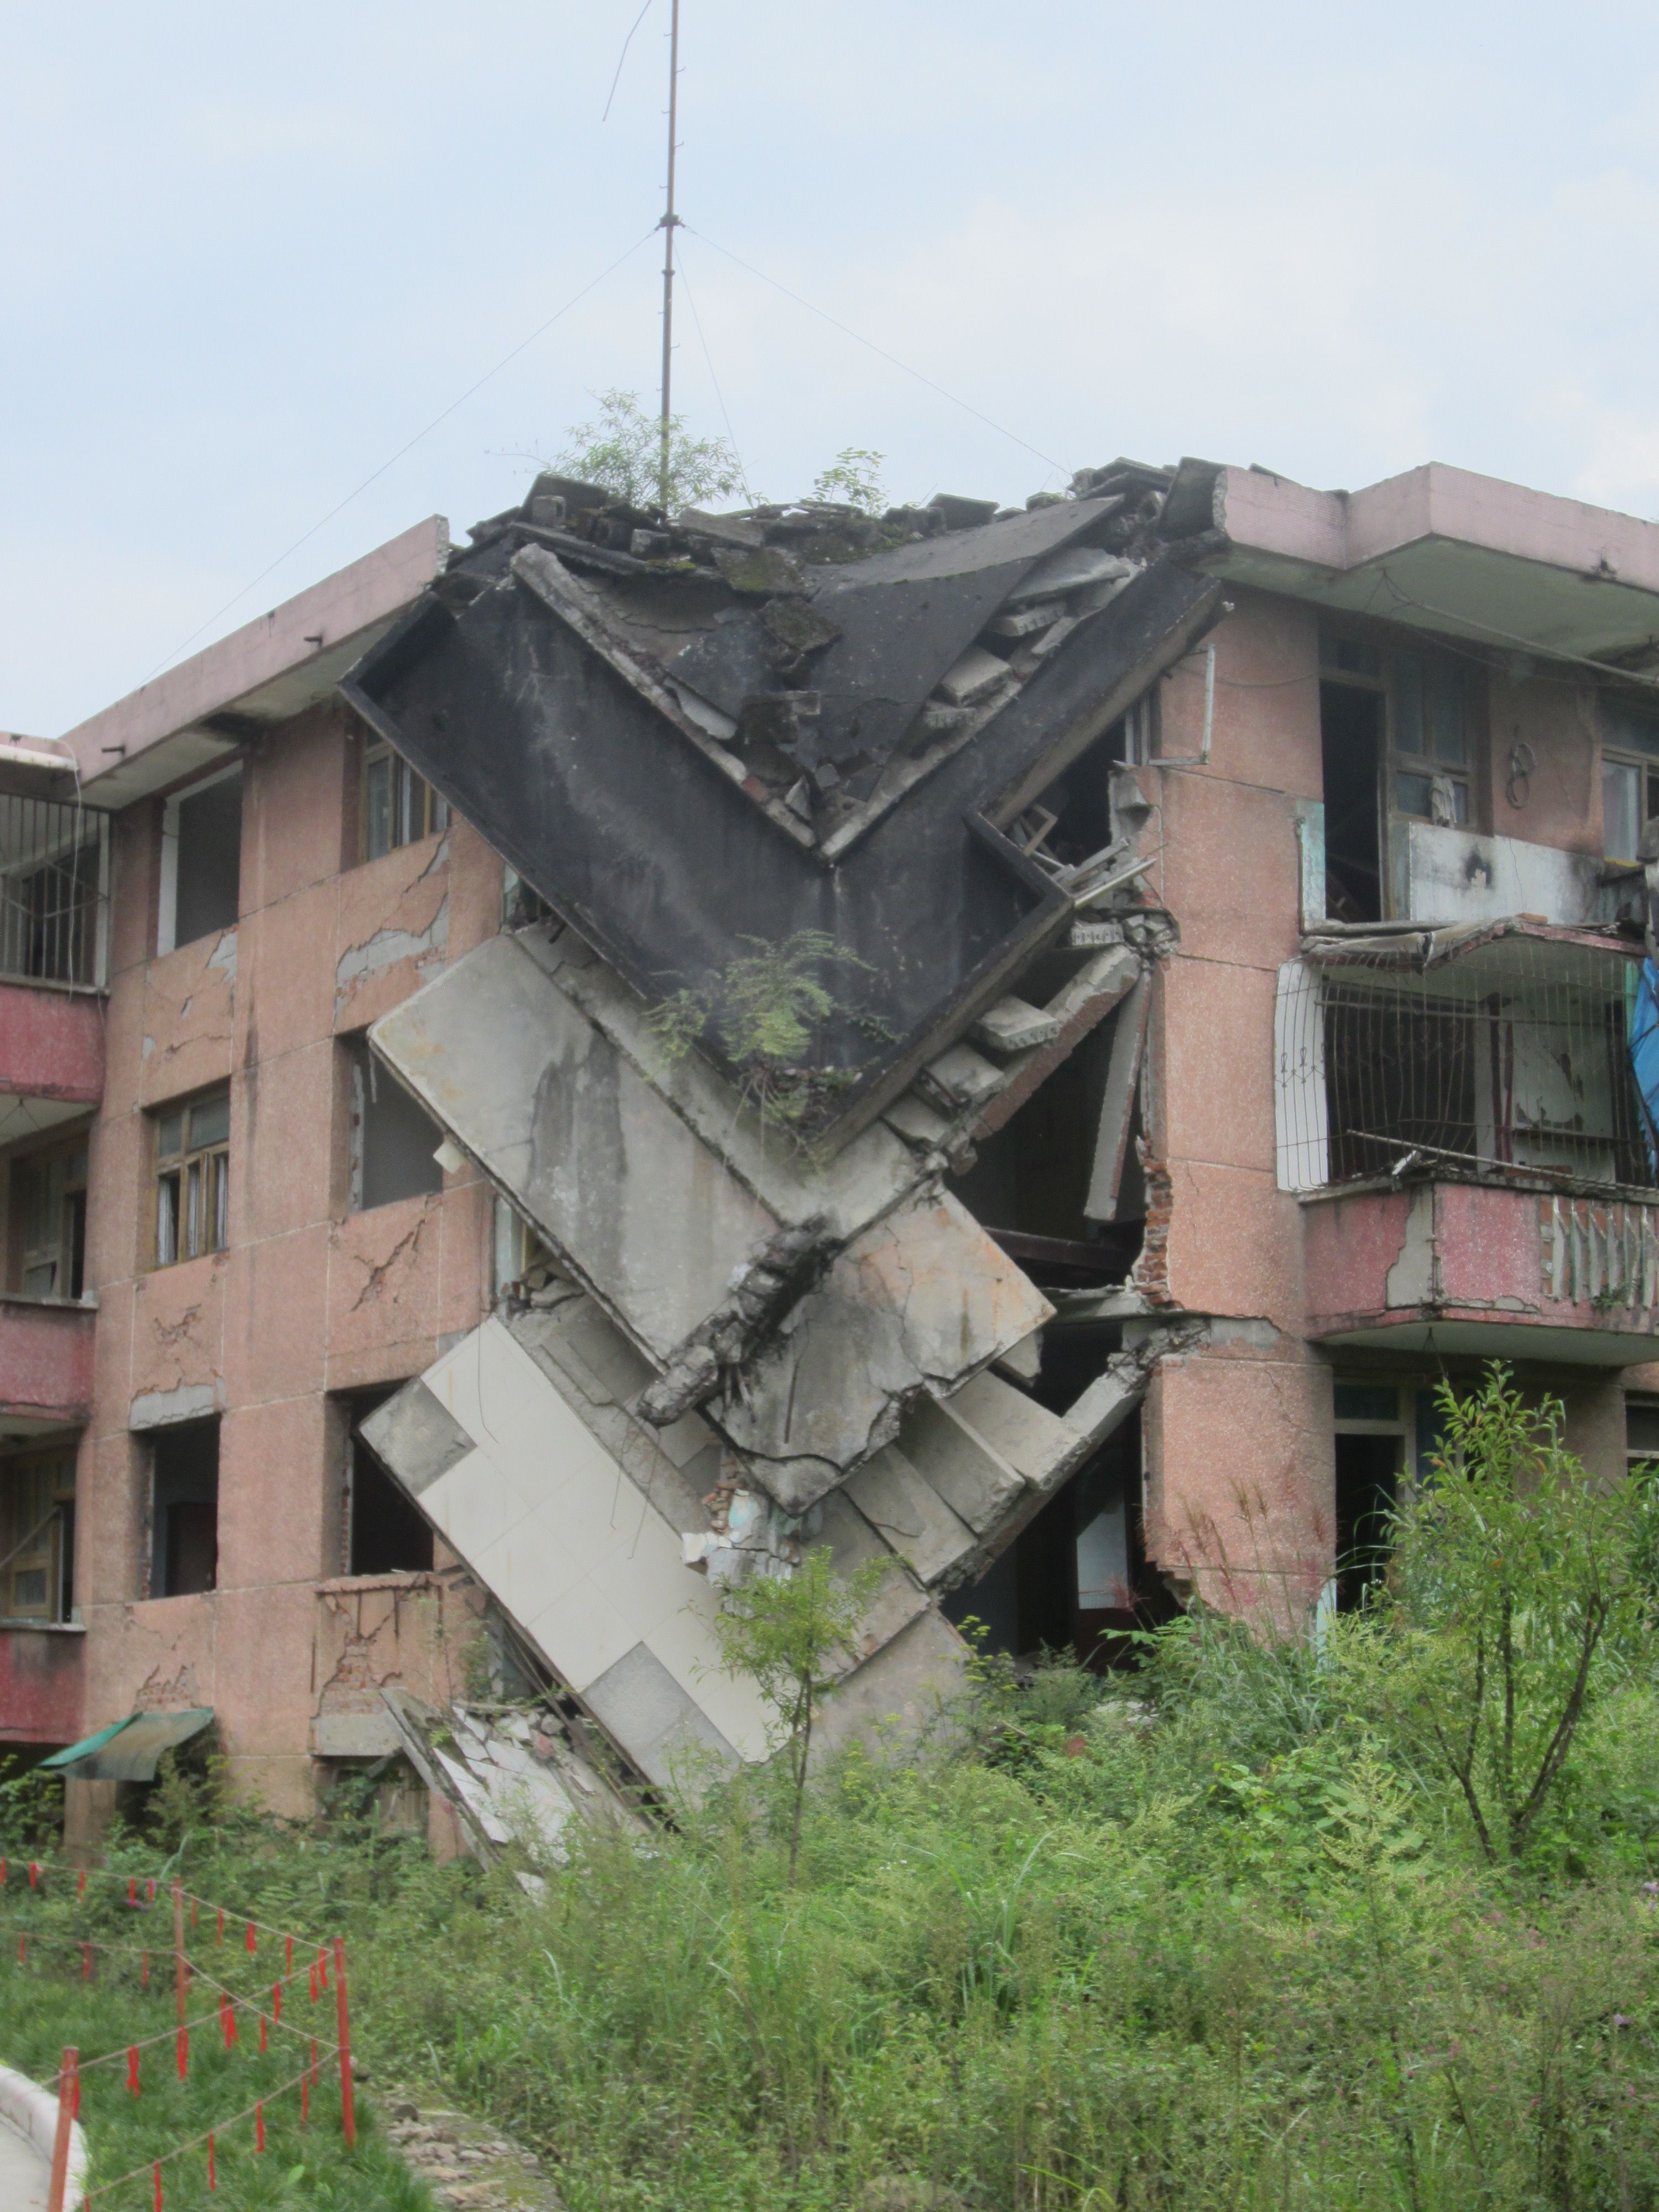 The earthquake was a real-time test of building safety. In this structure, the corner stairwell gave way while the rest of the building remained intact. Image by Daniel Brook. China, 2015.